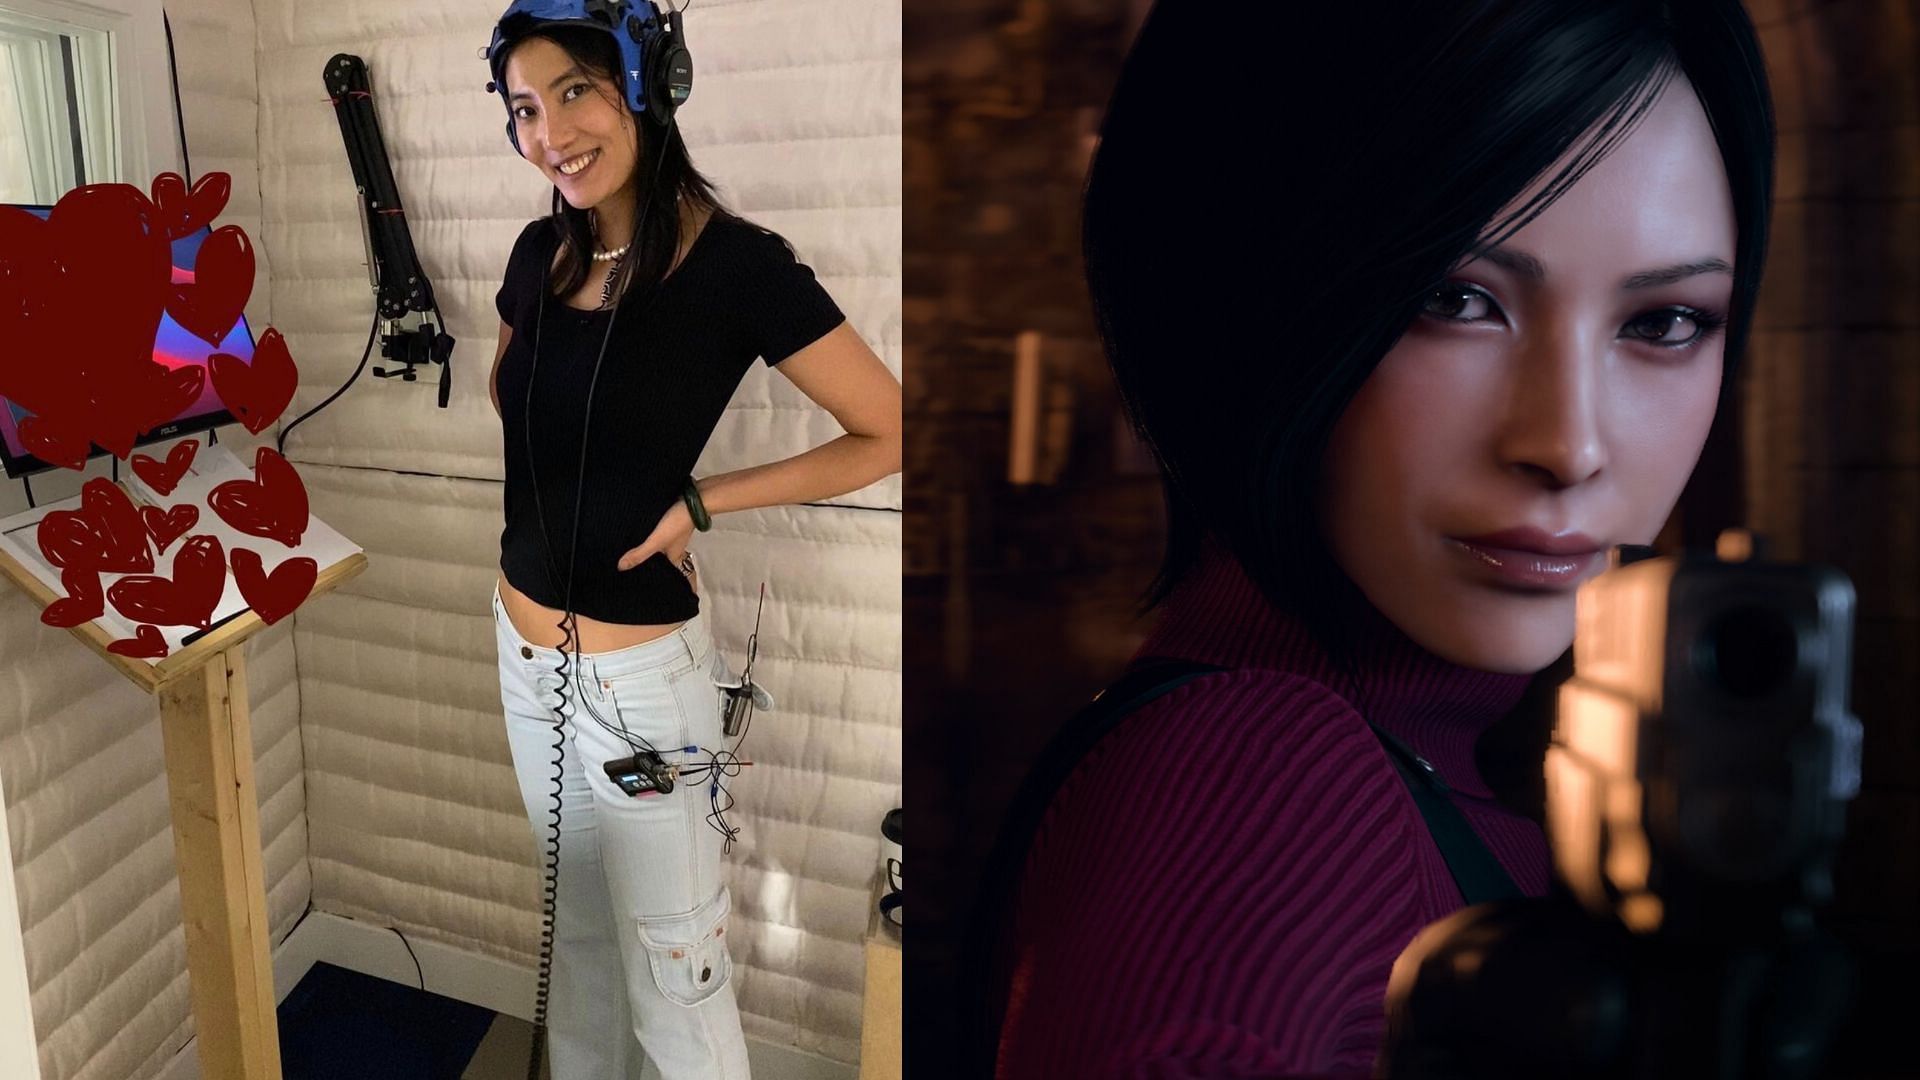 Lily Gao, who voices Ada Wong in the Resident Evil 4 remake receives hateful response from some fans who disliked her portrayal of the character (Image via Capcom, Instagram/ Lily Gao (@lilygao1))